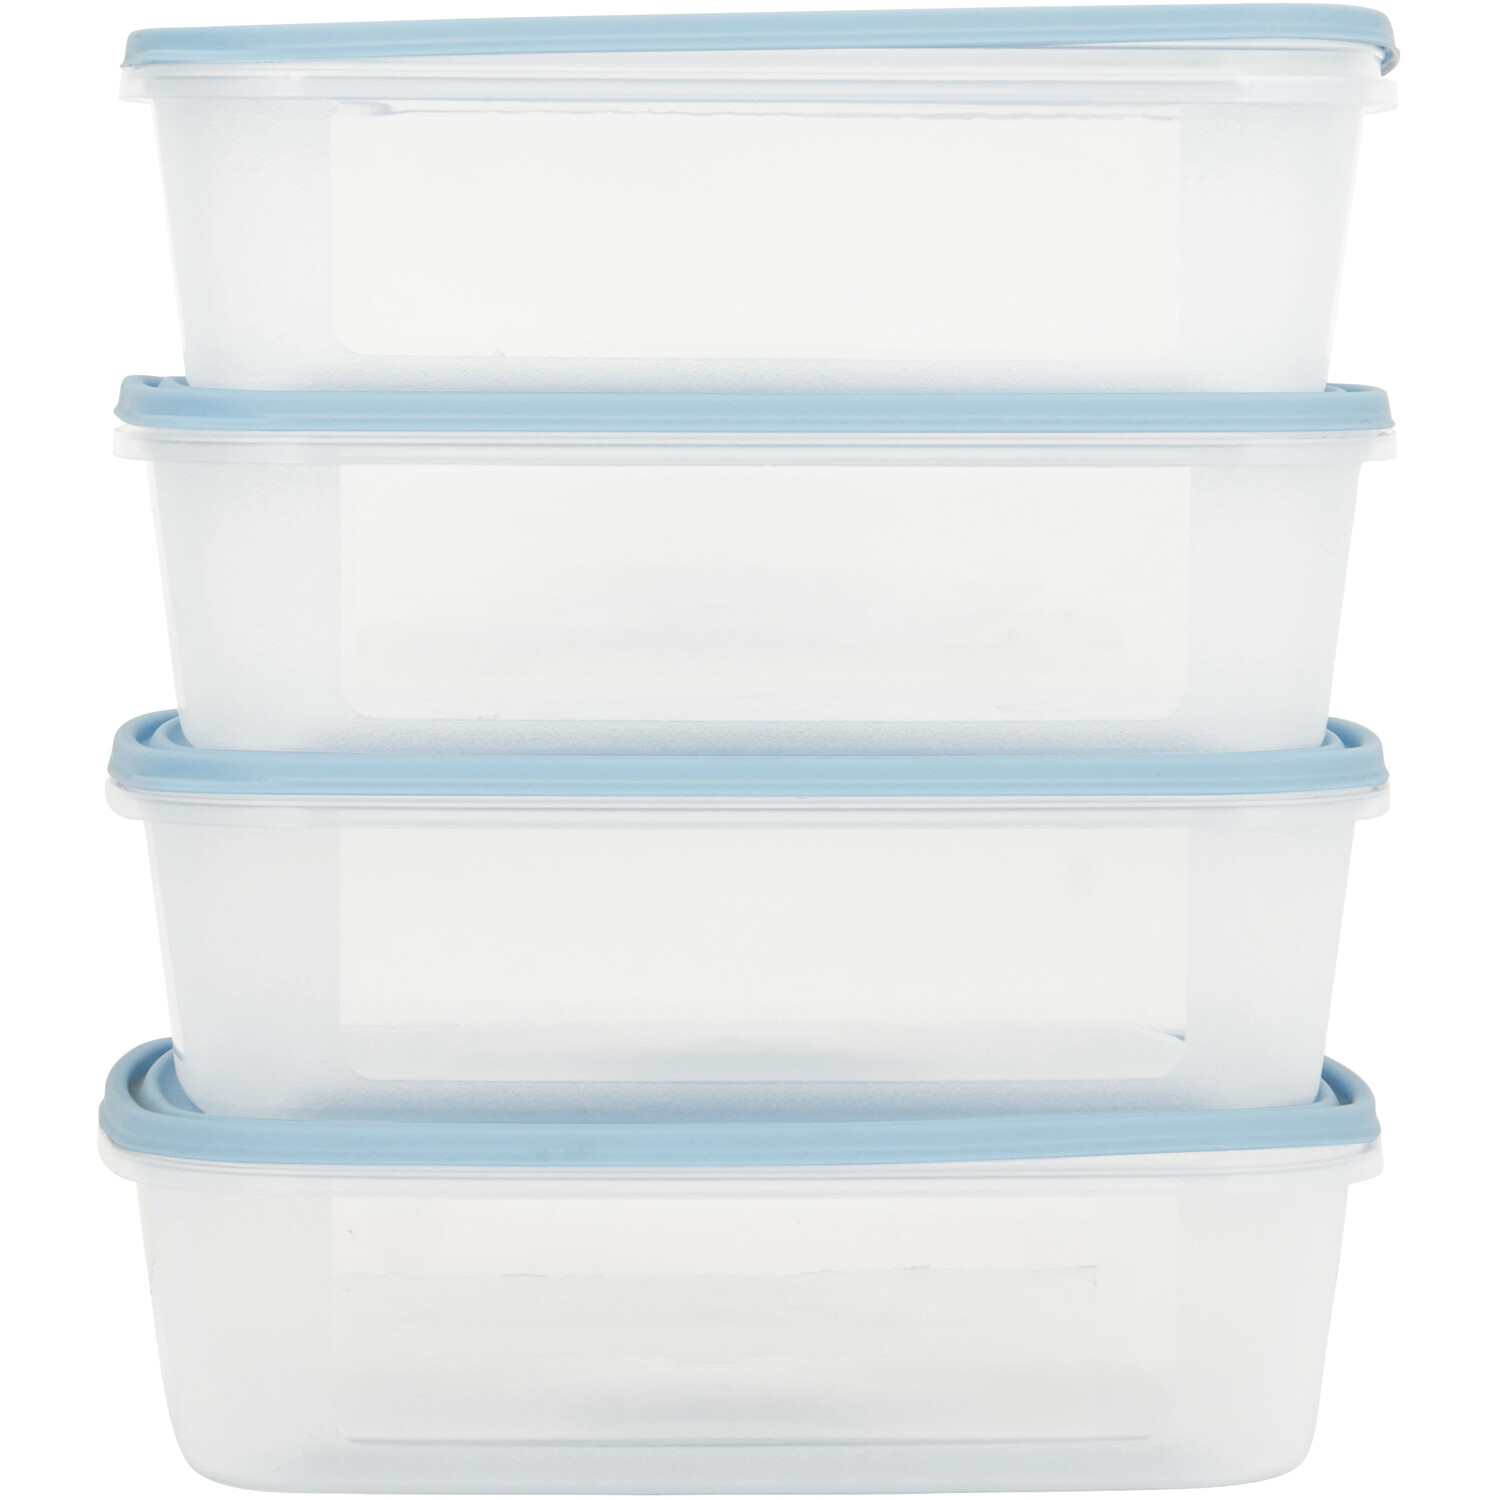 Set of 4 Everyday Food Boxes - Clear Image 6